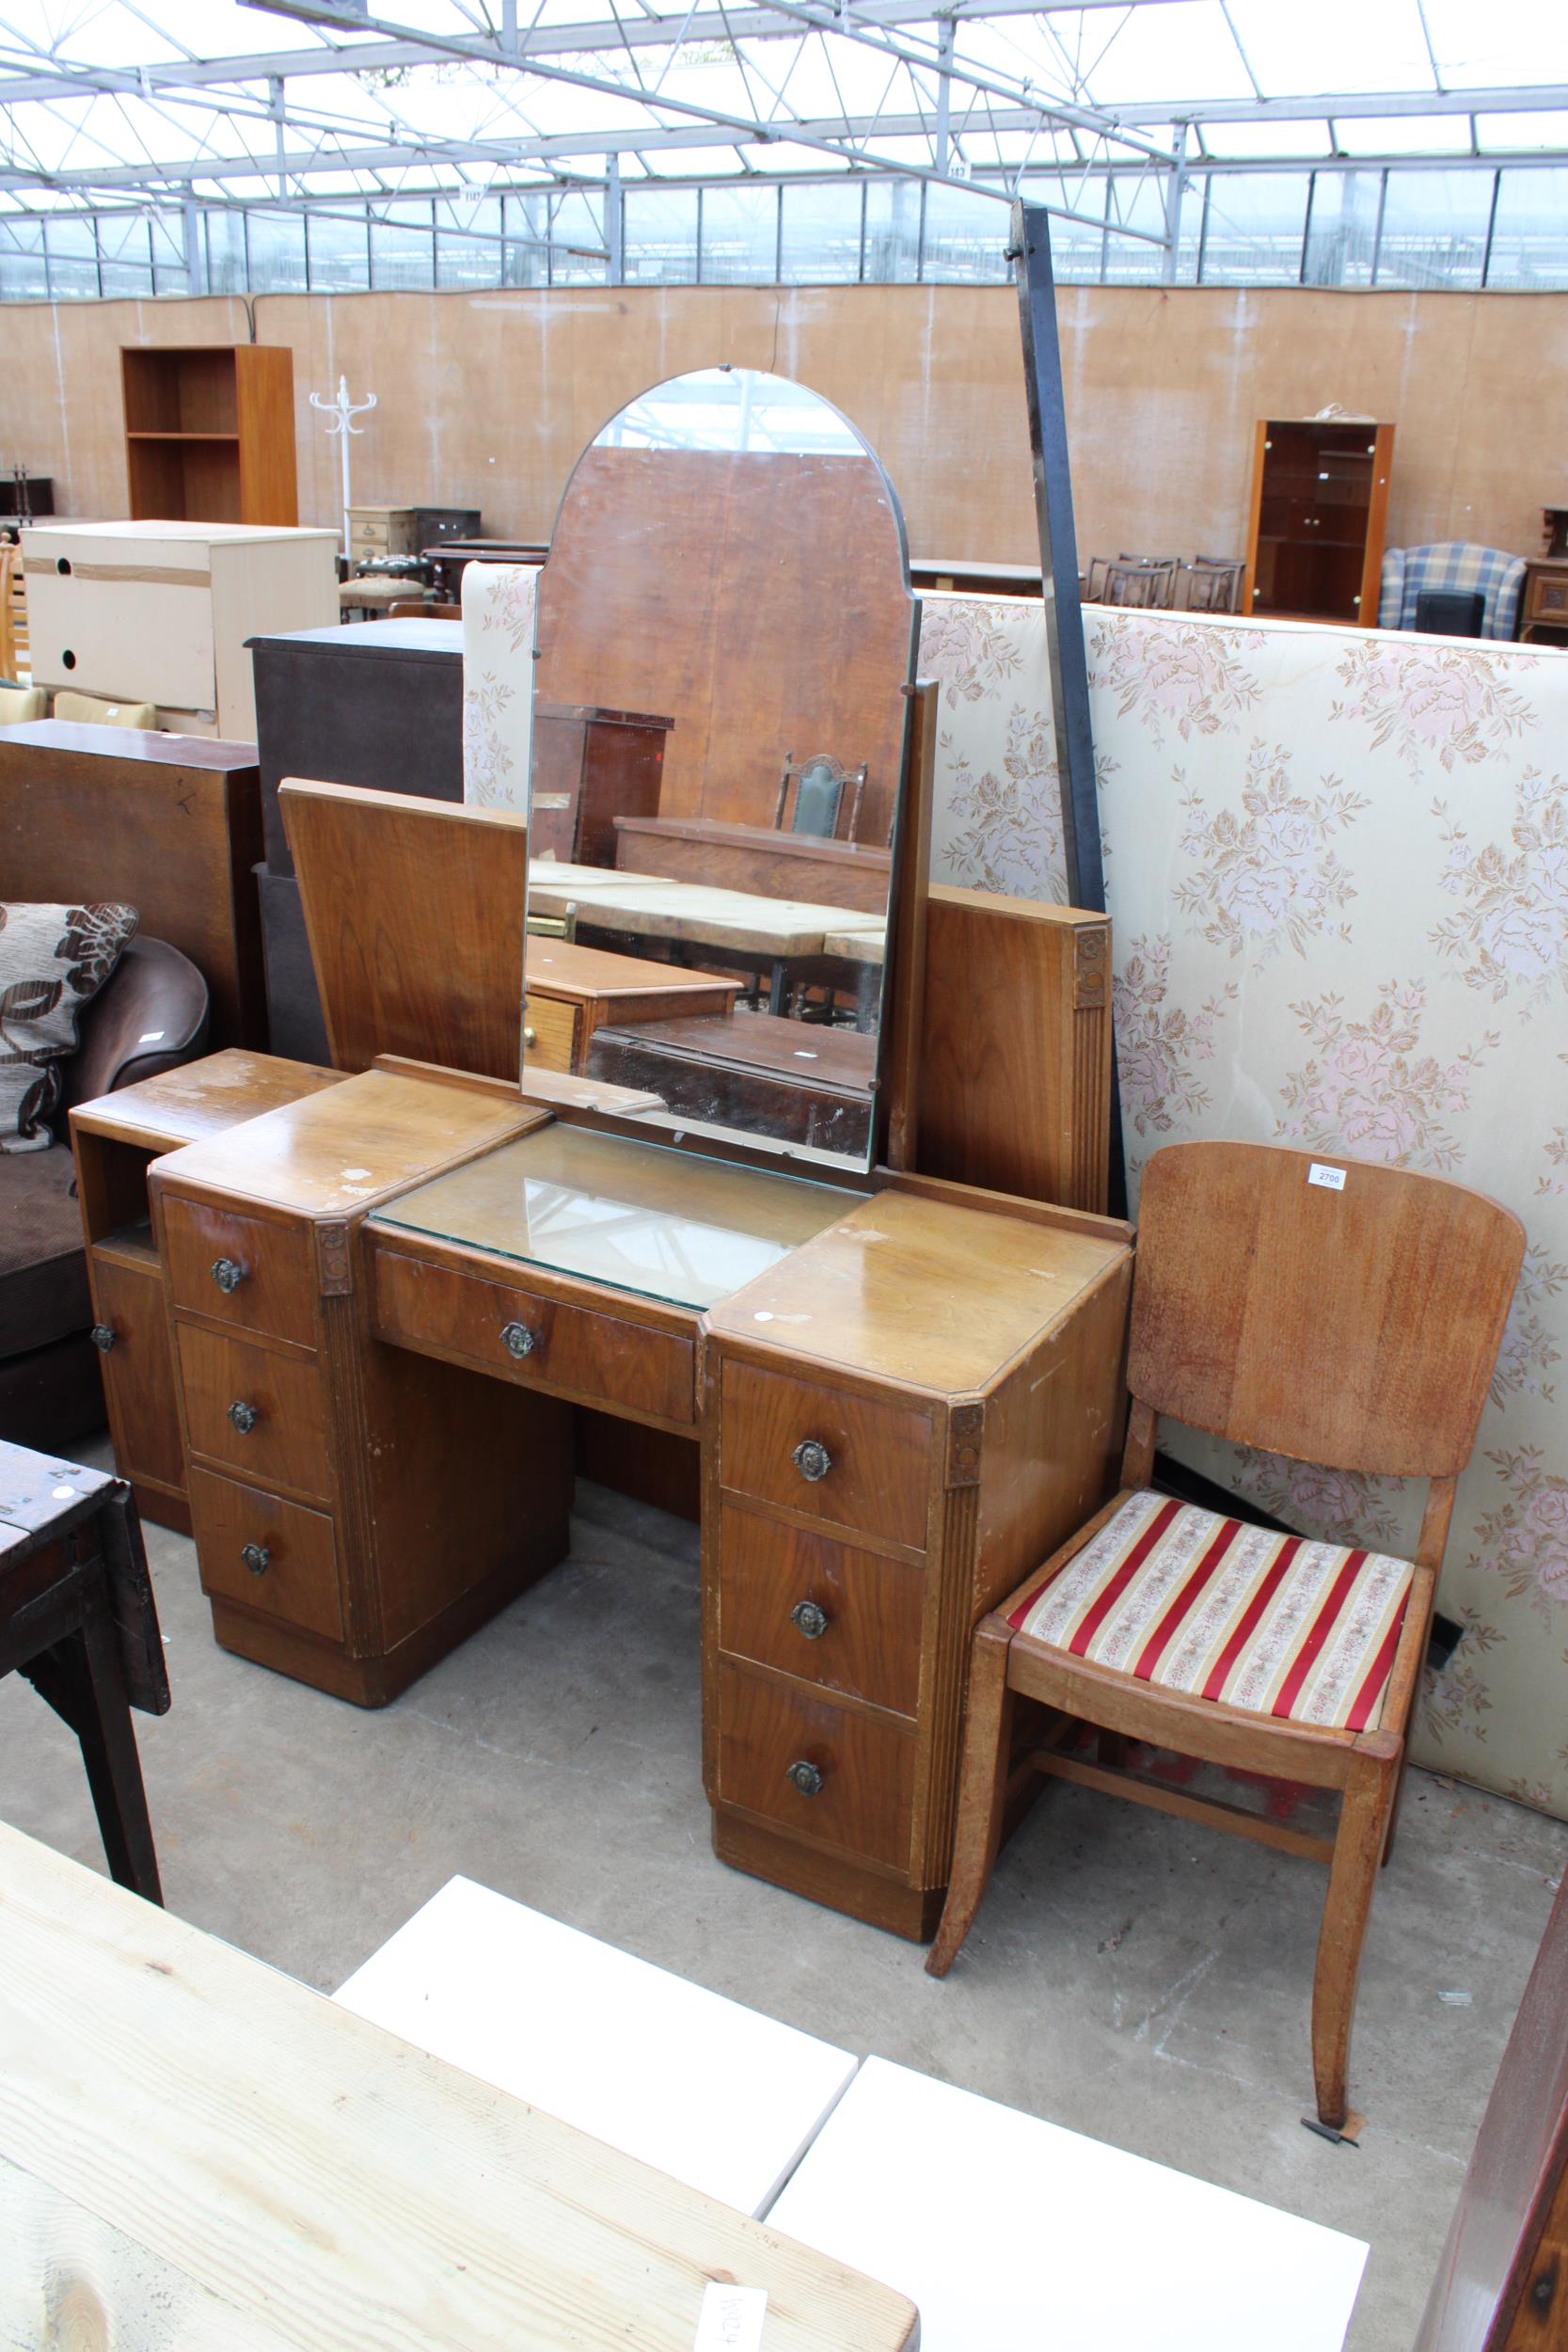 A MID 20TH CENTURY WALNUT DRESSING TABLE, BEDSIDE LOCKER, BEDSTEAD AND SIMILAR CHAIR